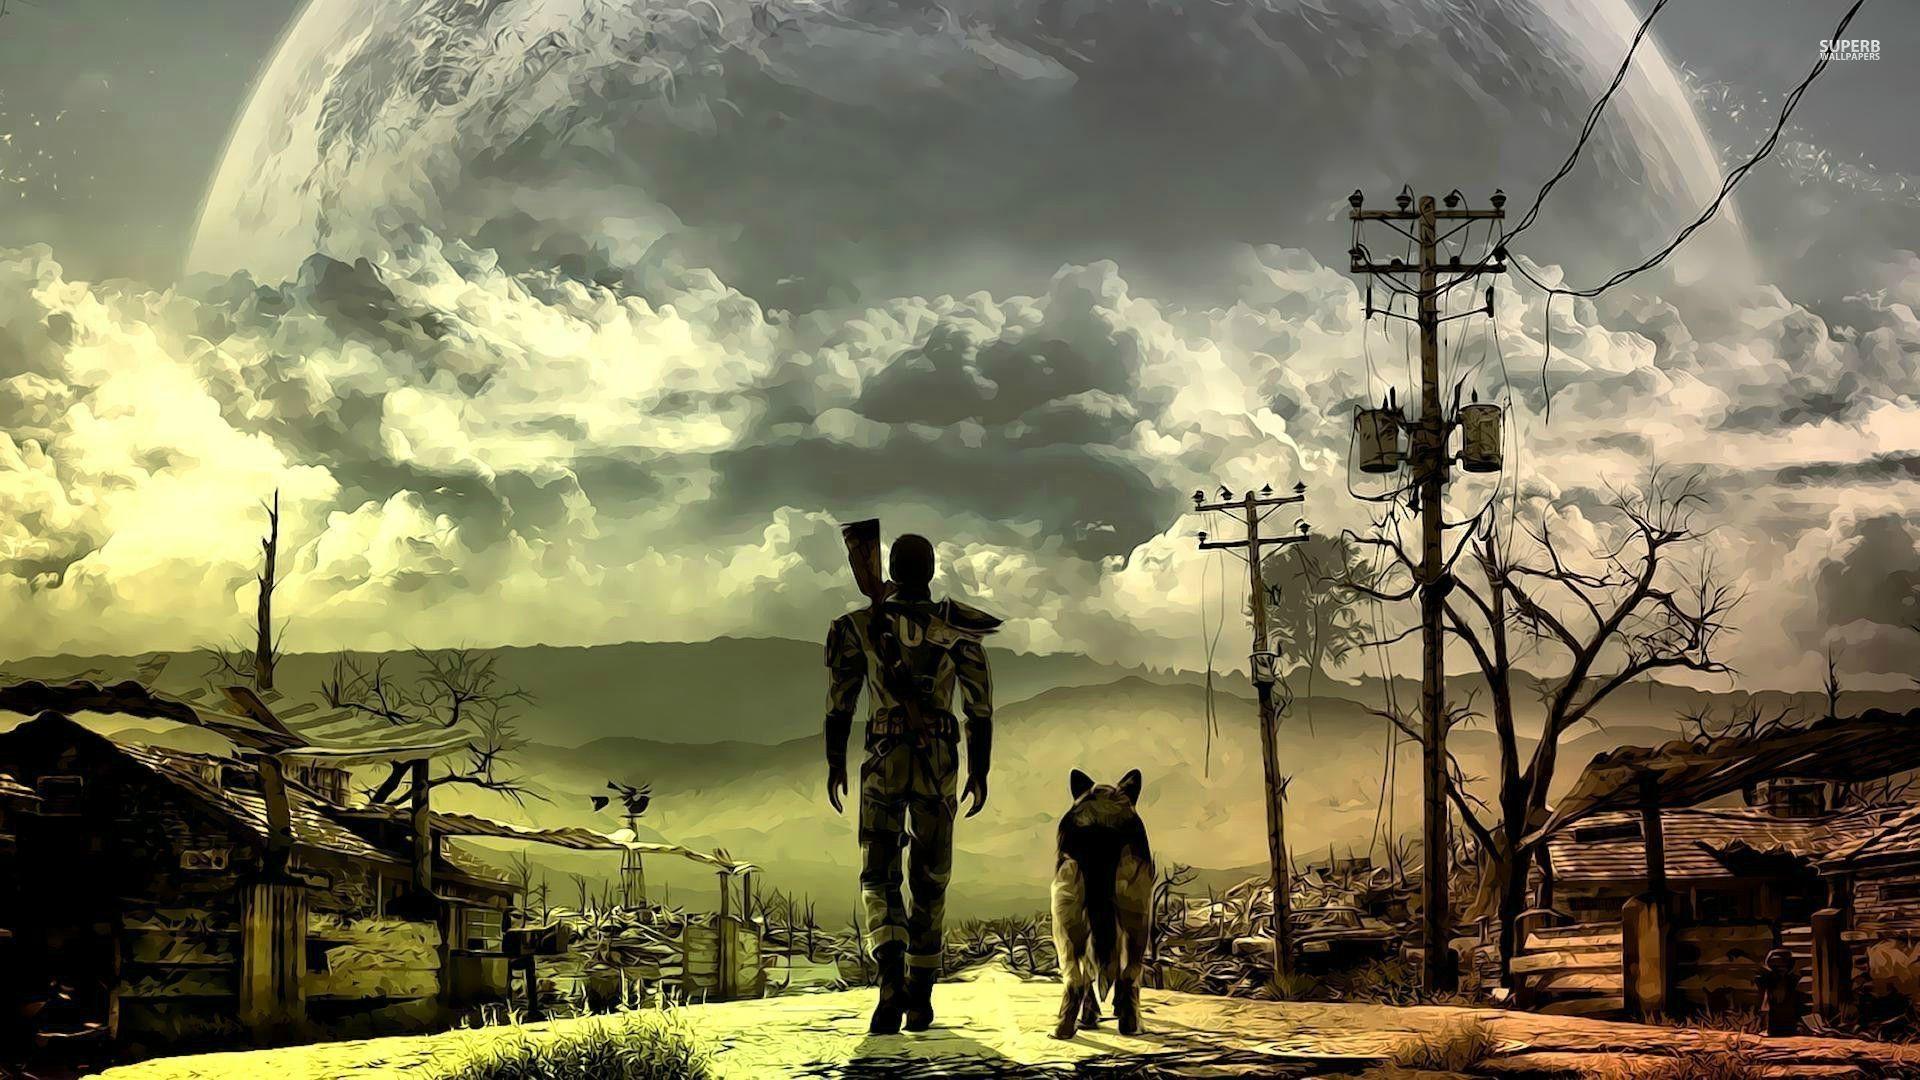 Fallout backgroundDownload free High Resolution